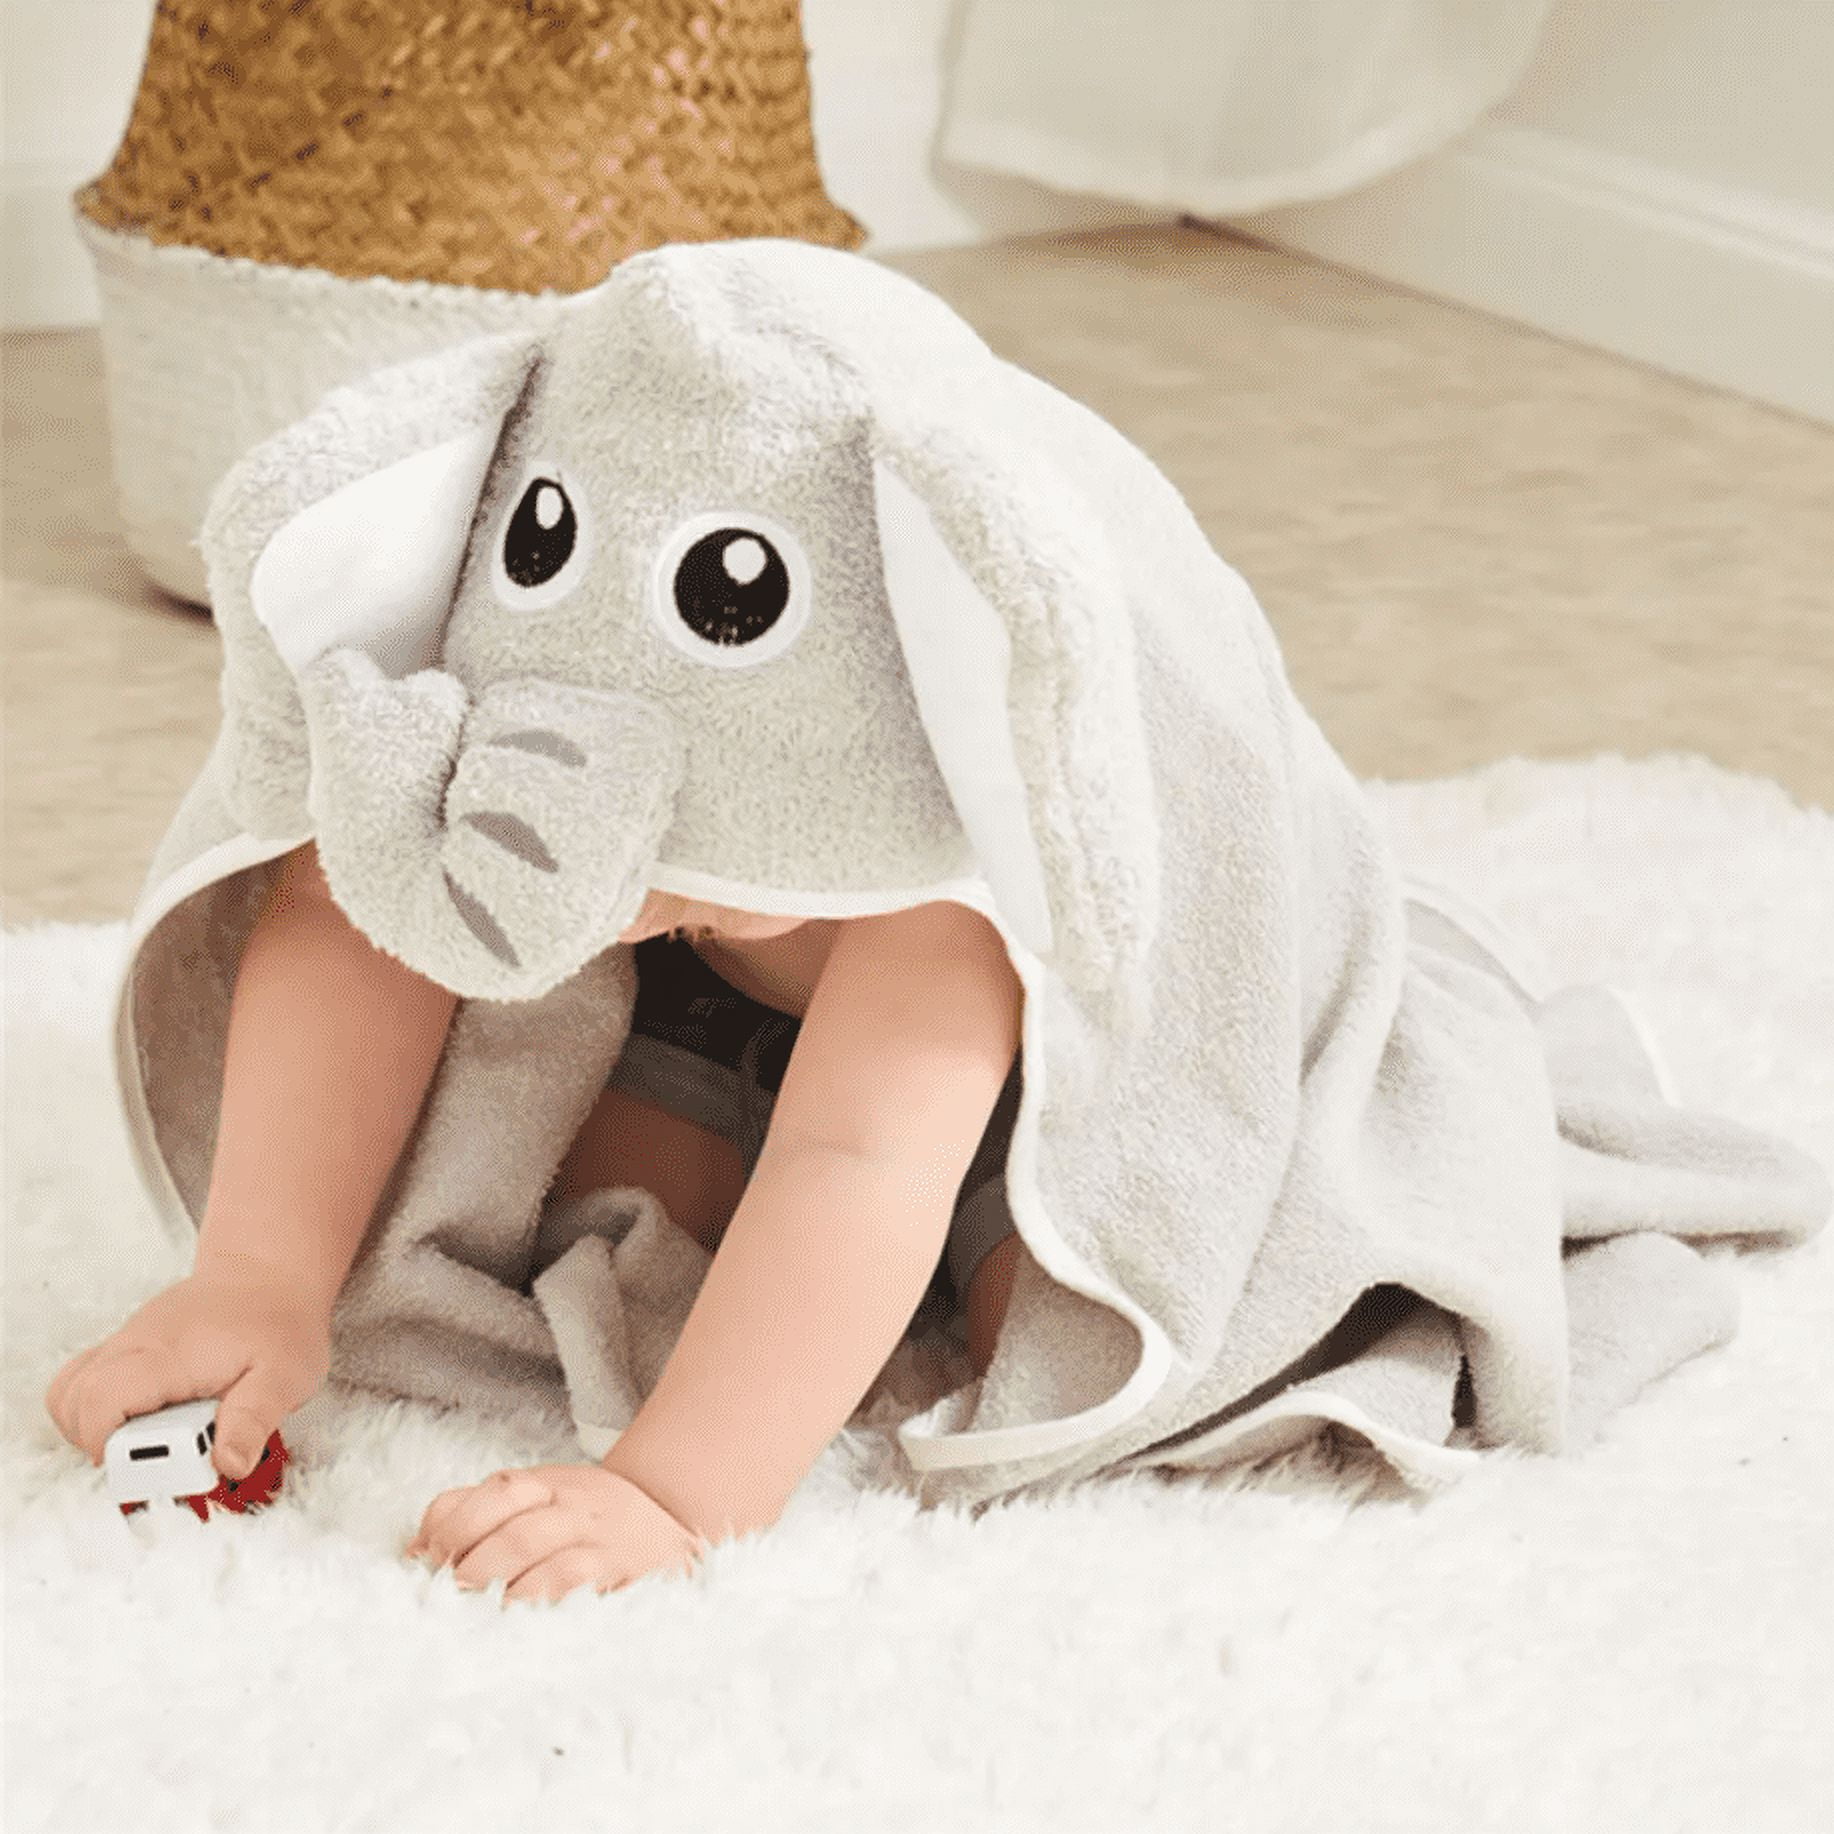  Supi Familia Baby Hooded Towel – Extra Large 45 x 35-inch  Toddler Bath Towel with Hood – Soft Bamboo Cotton Kids Hooded Bath Towel –  Bamboo Baby Towel for Boys and